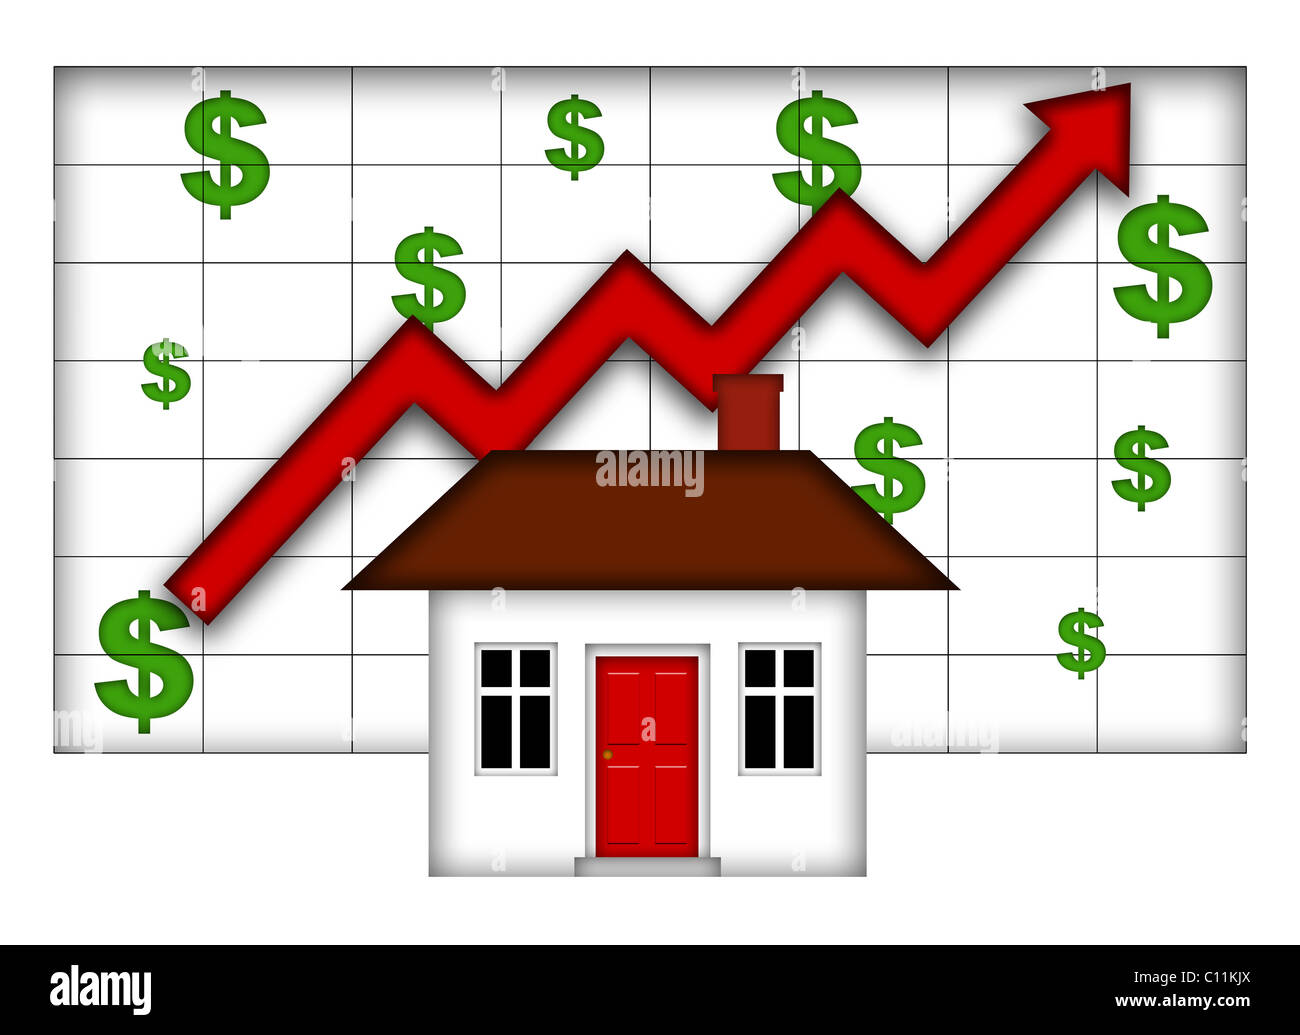 Real Estate Home Values Going Up Chart Stock Photo